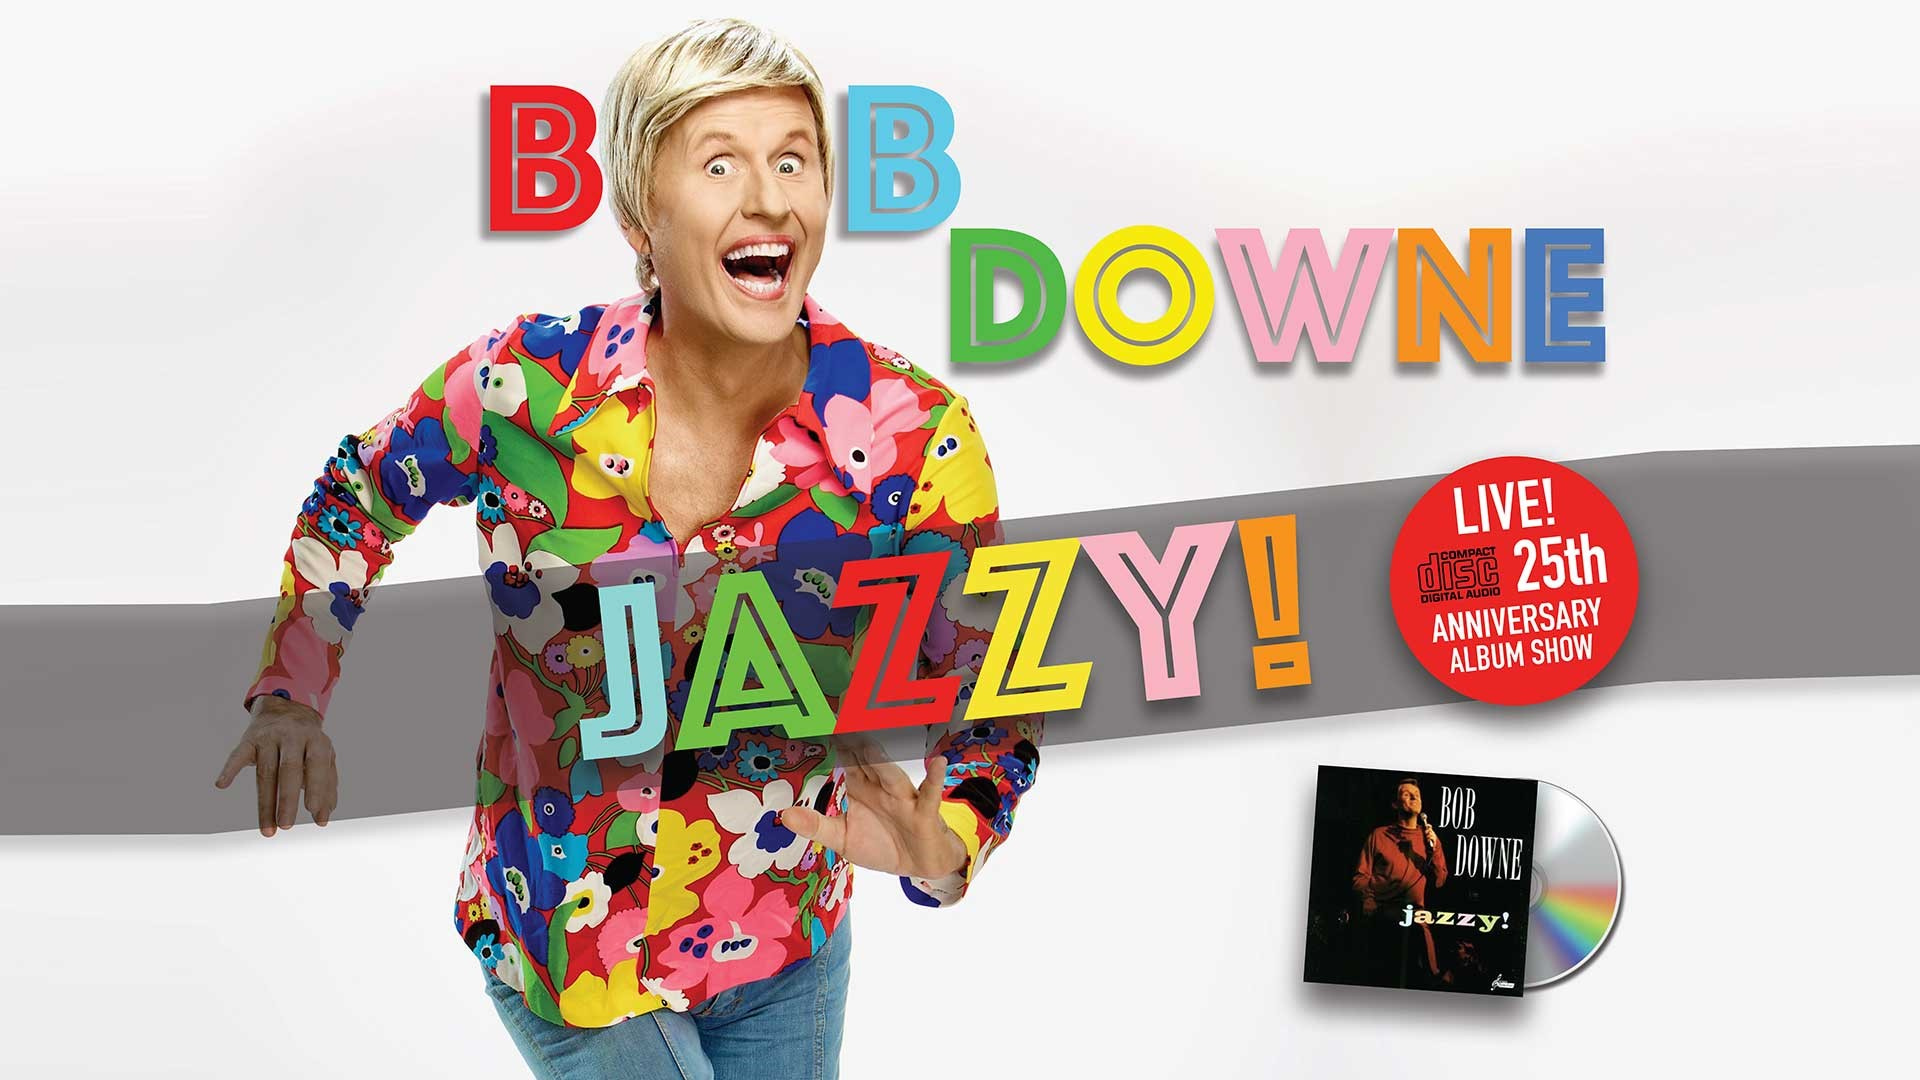 Bob Downe Jazzy! Show at Performing Arts Centre